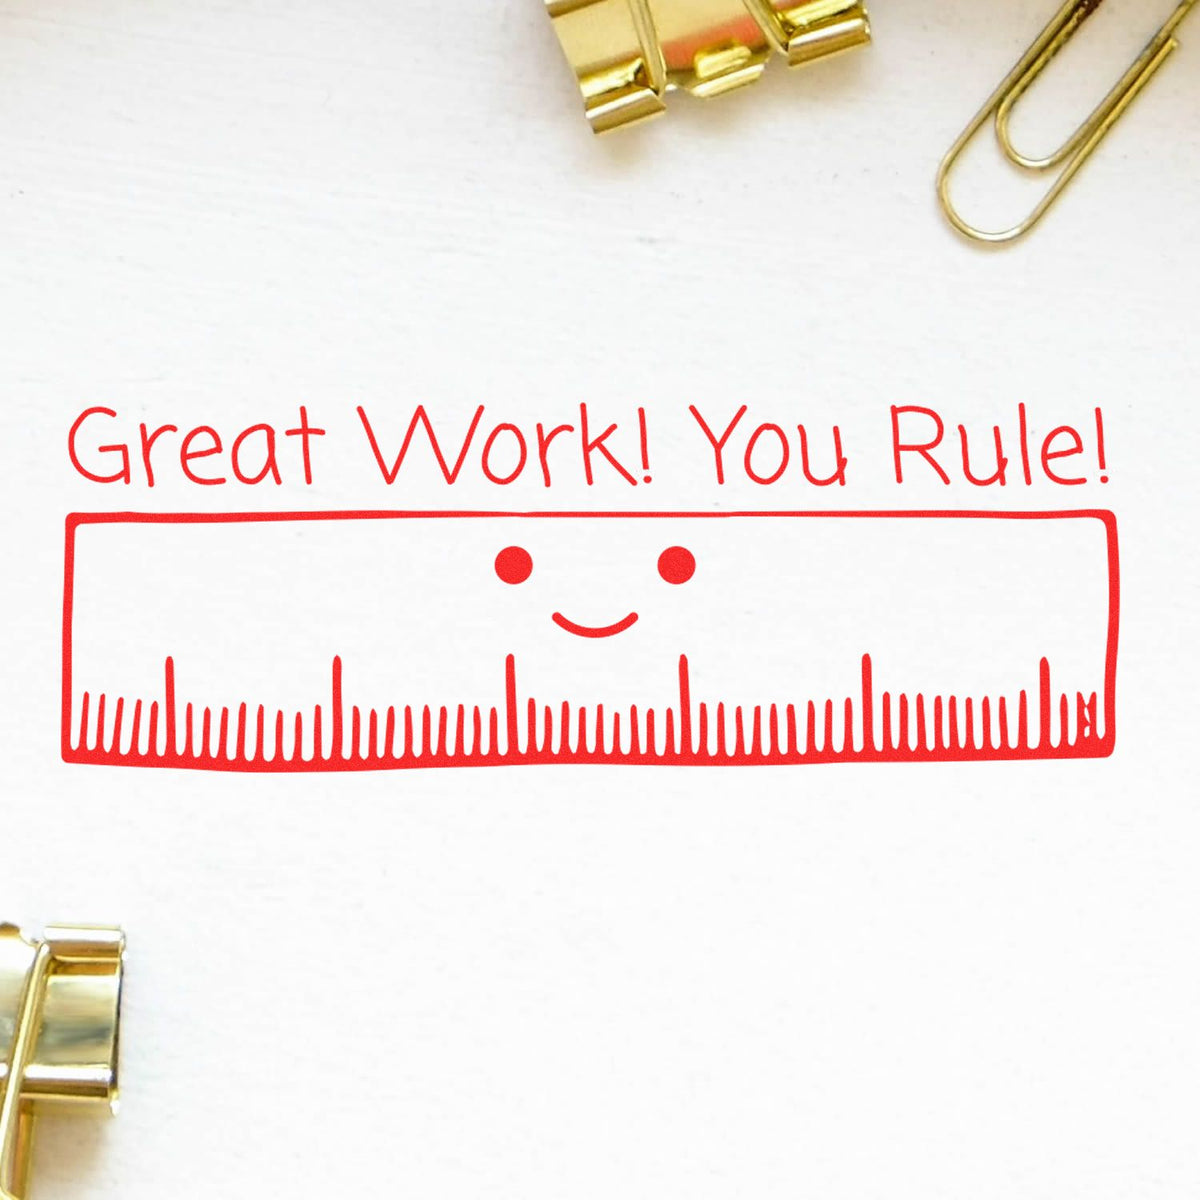 Great Work You Rule Rubber Stamp In Use Photo